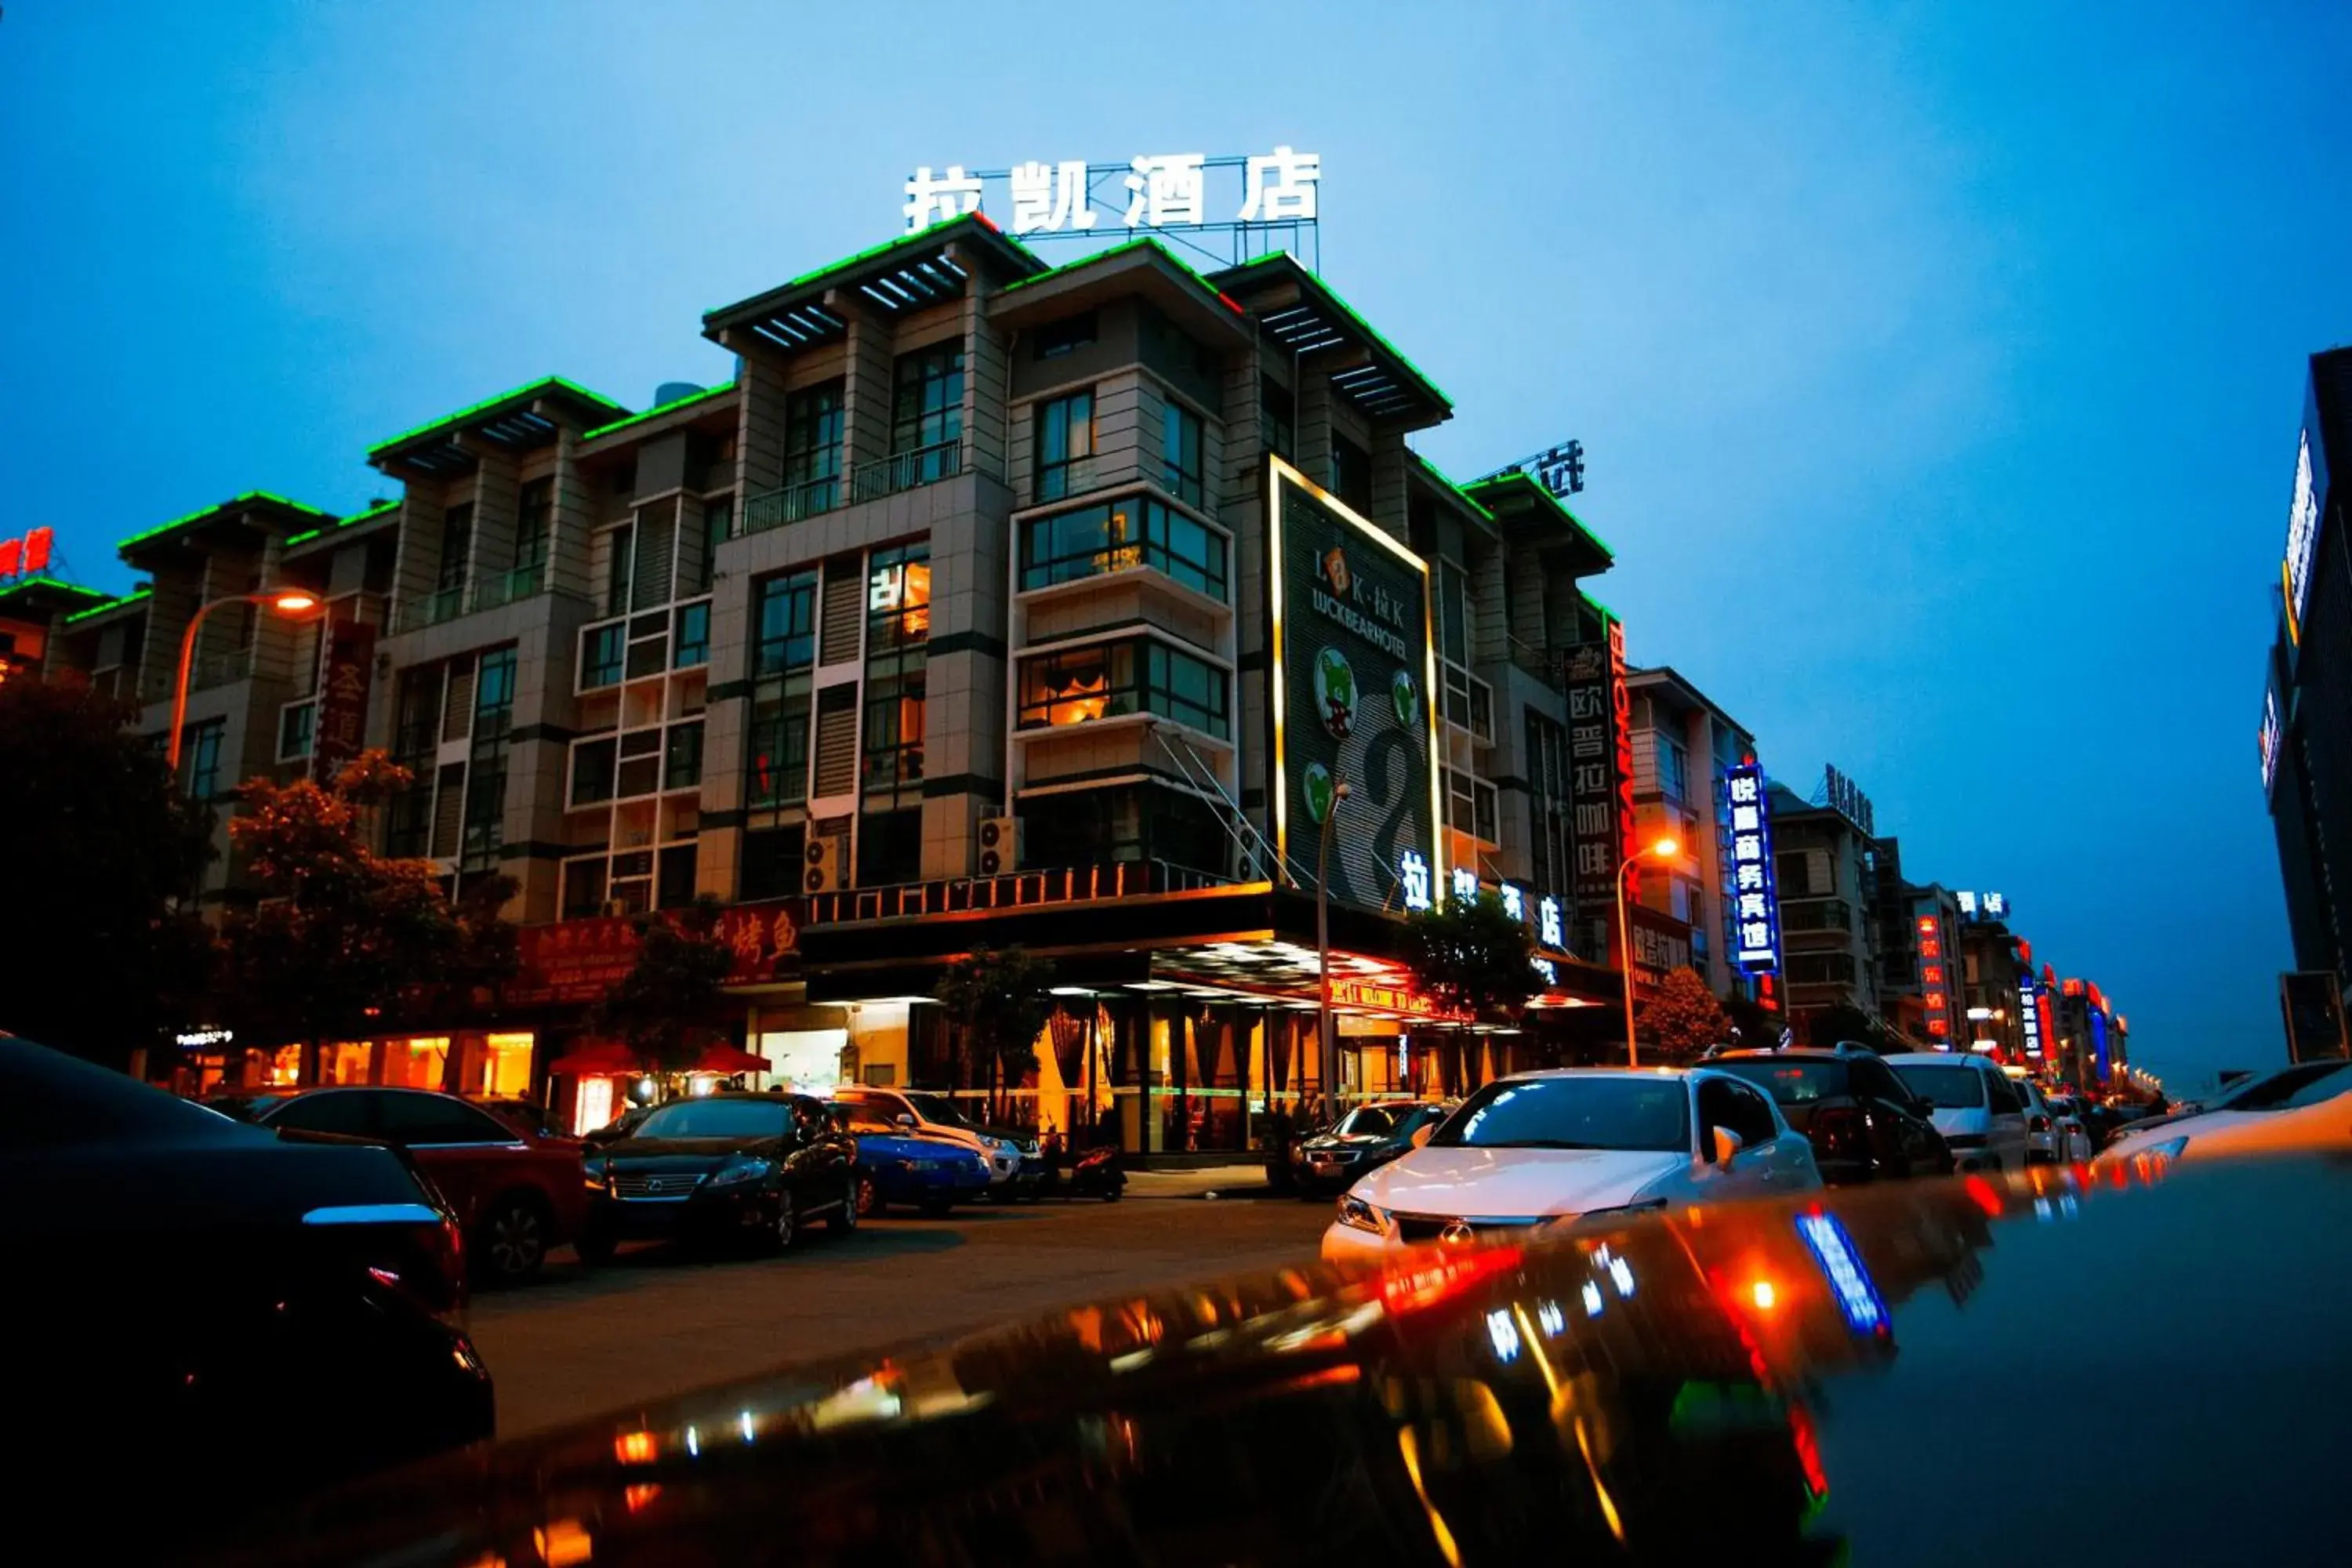 Area and facilities, Property Building in Yiwu Luckbear Hotel